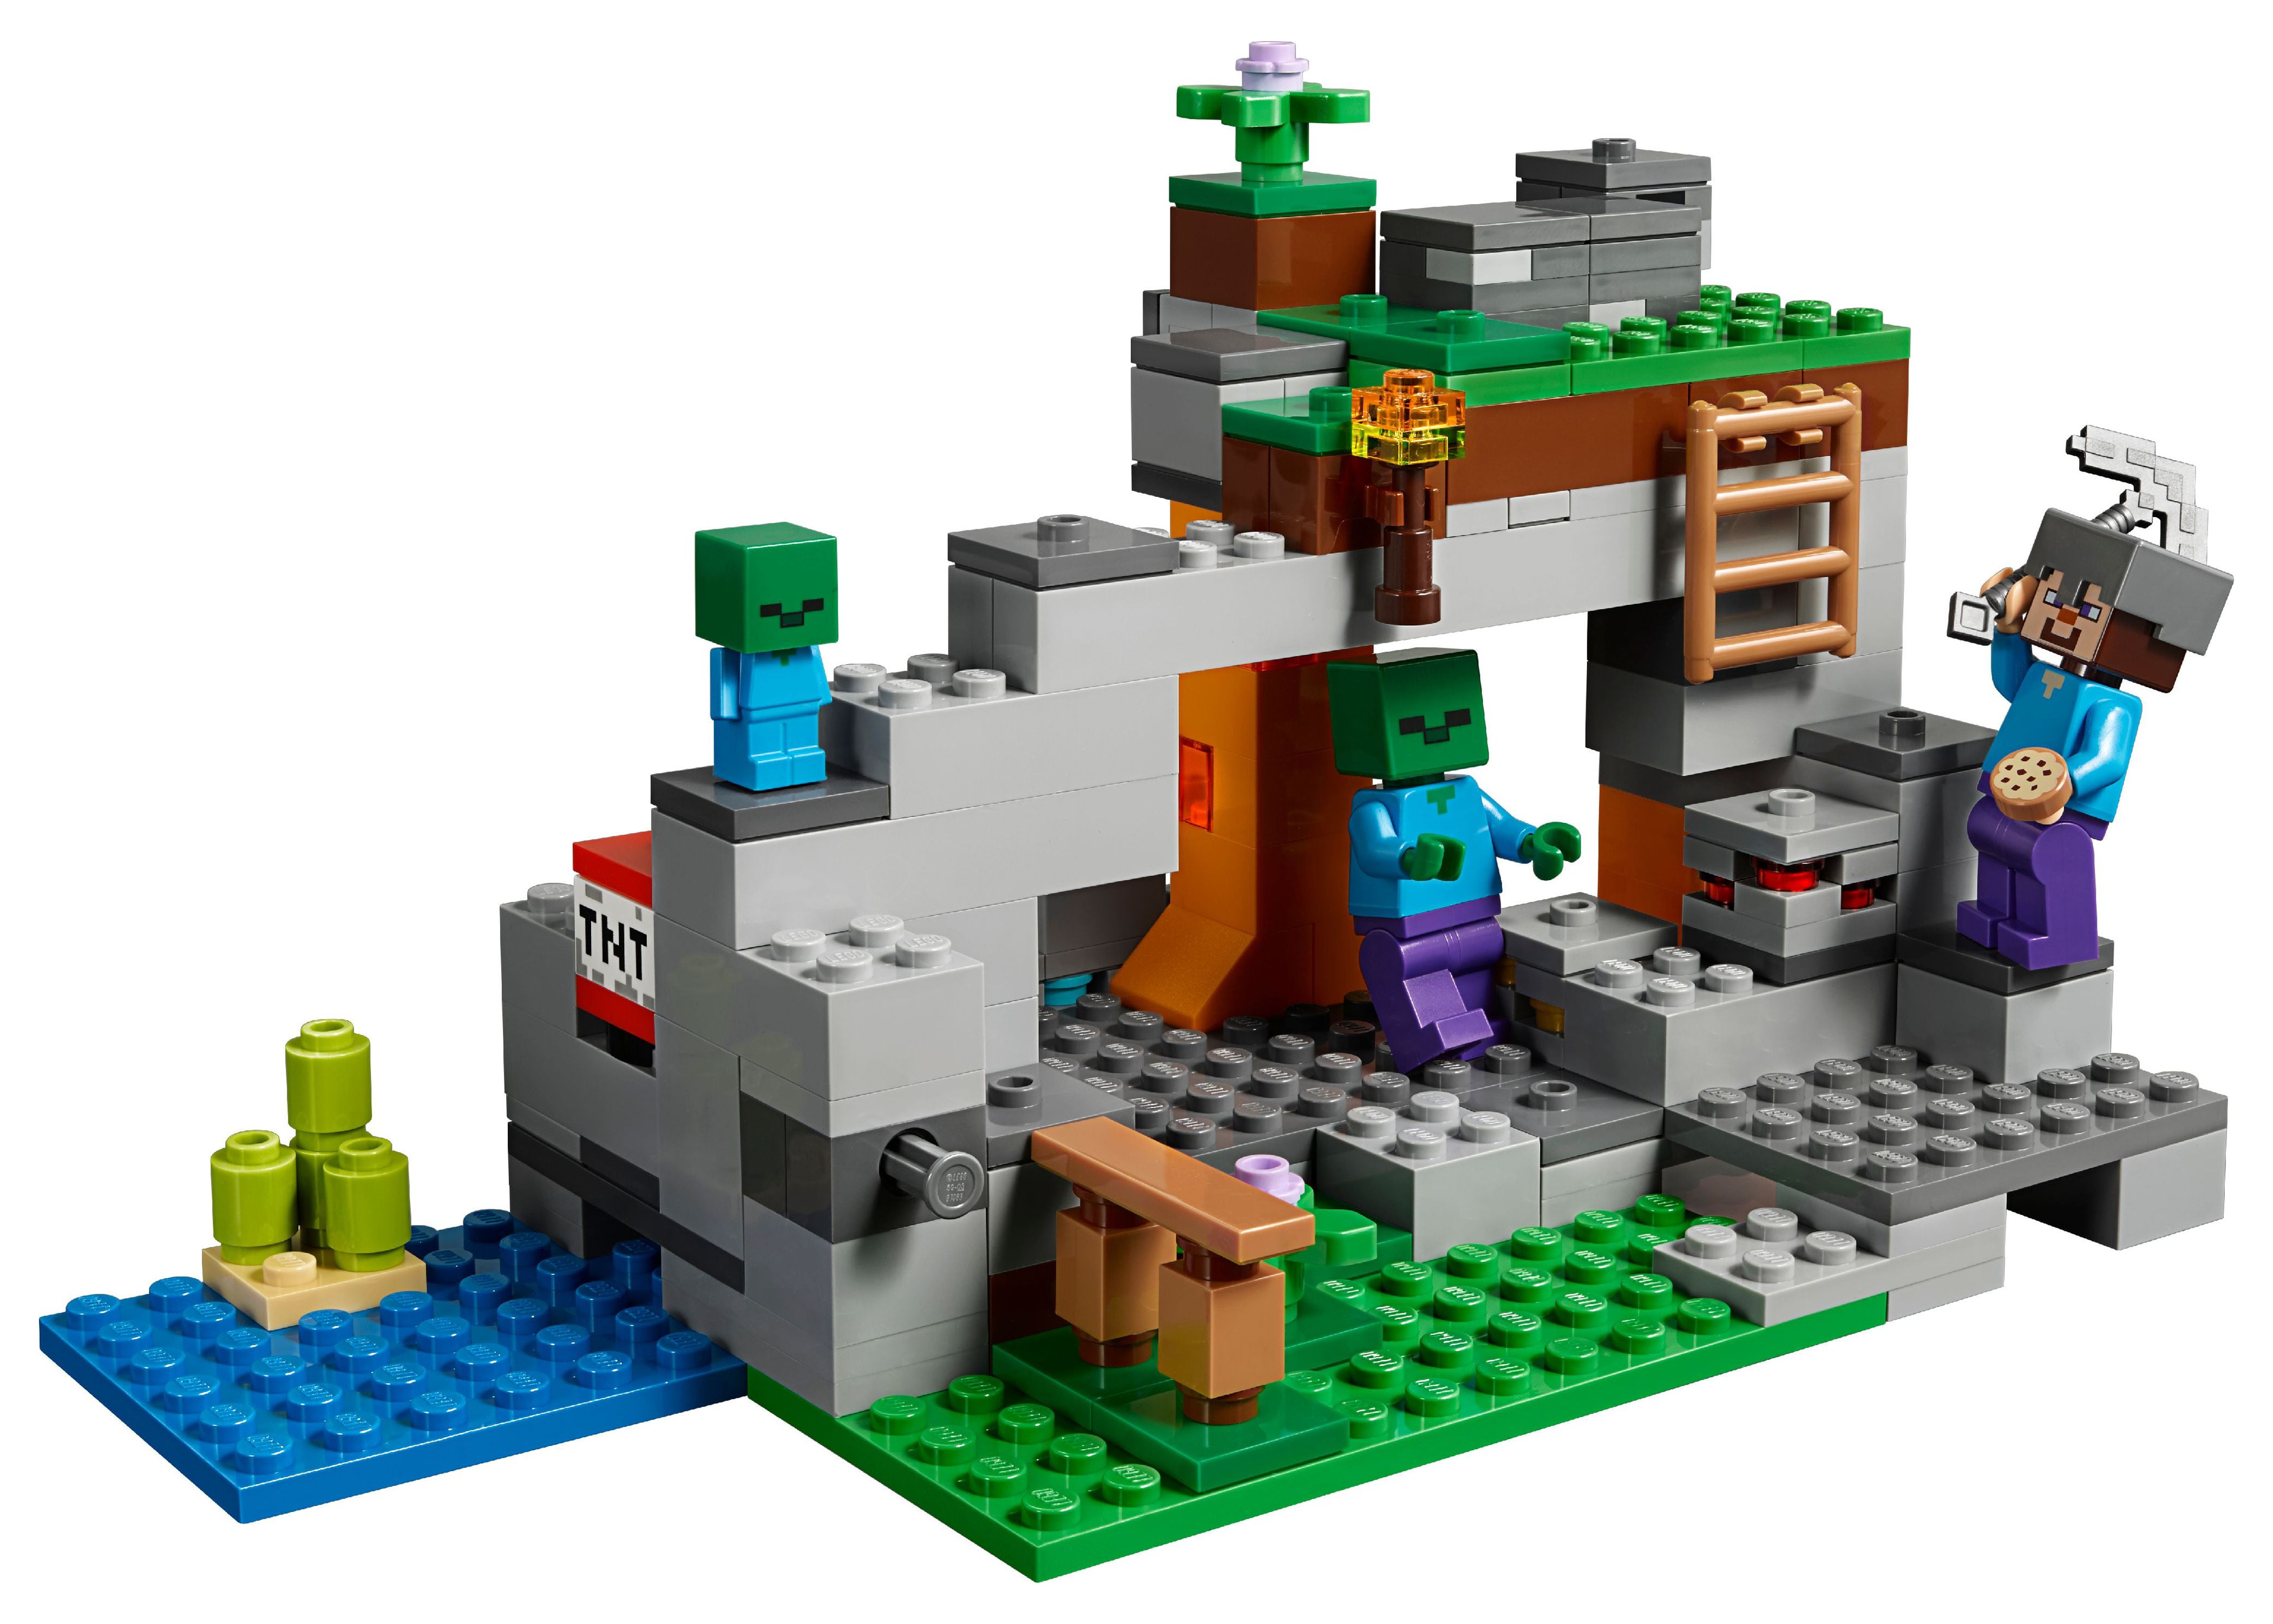 LEGO Minecraft The Zombie Cave 21141 Building Kit for Creative Play - image 6 of 7